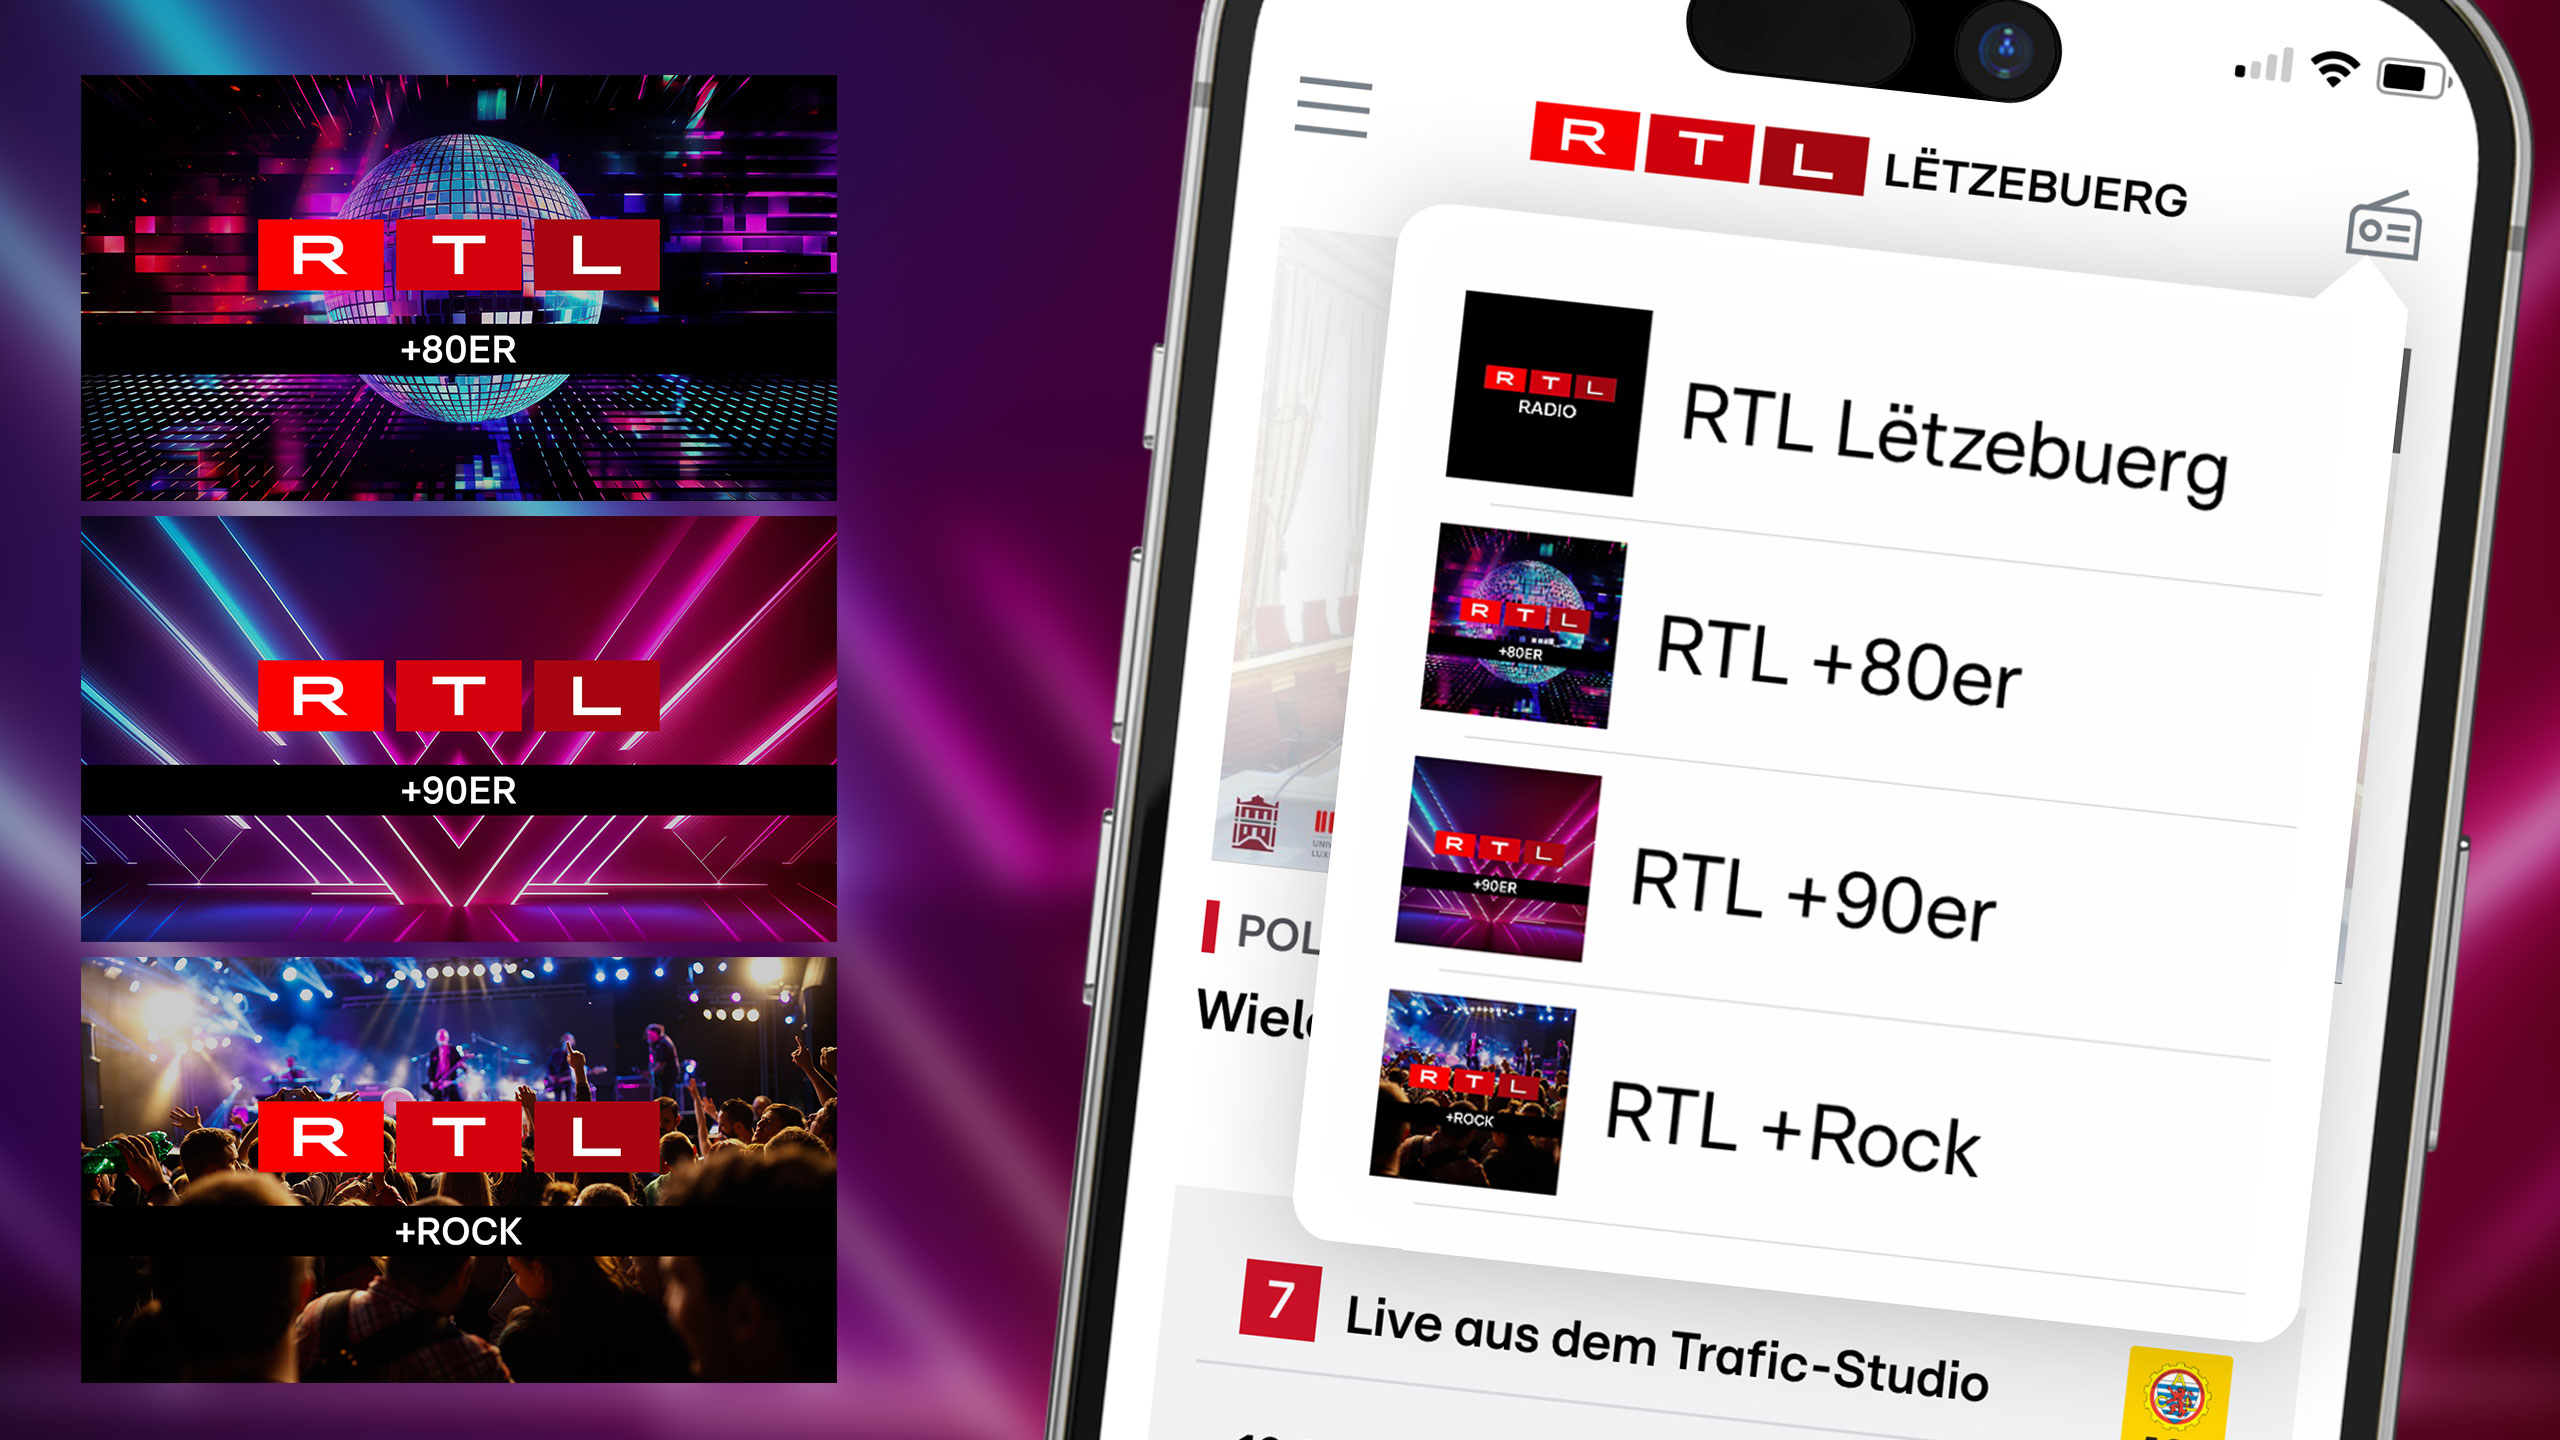 RTL Luxembourg launches a dedicated radio with FFH-Plus technology